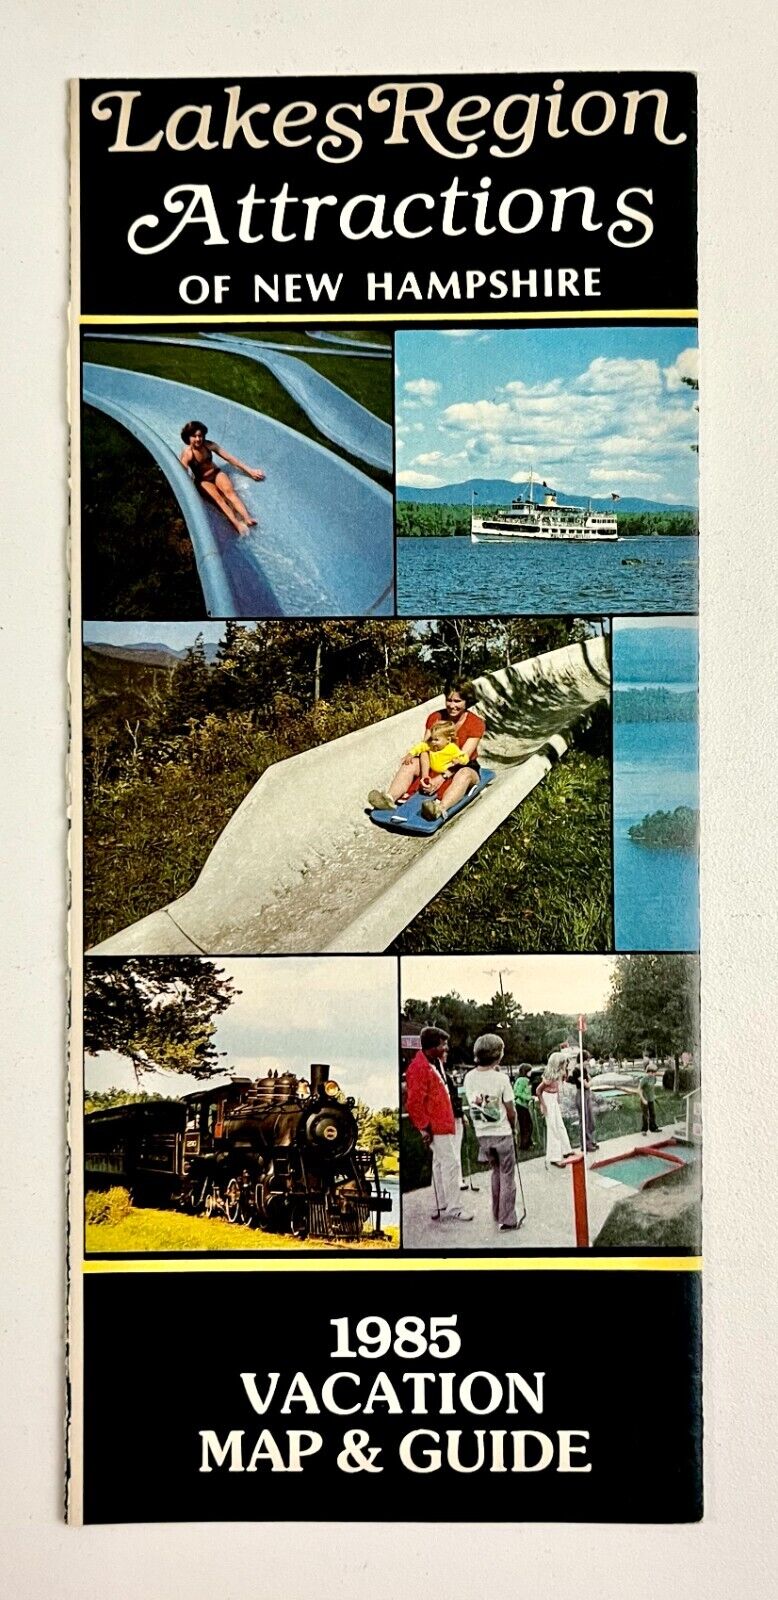 1985 New Hampshire Lakes Region Attractions Vacation Guide VTG Travel Brochure